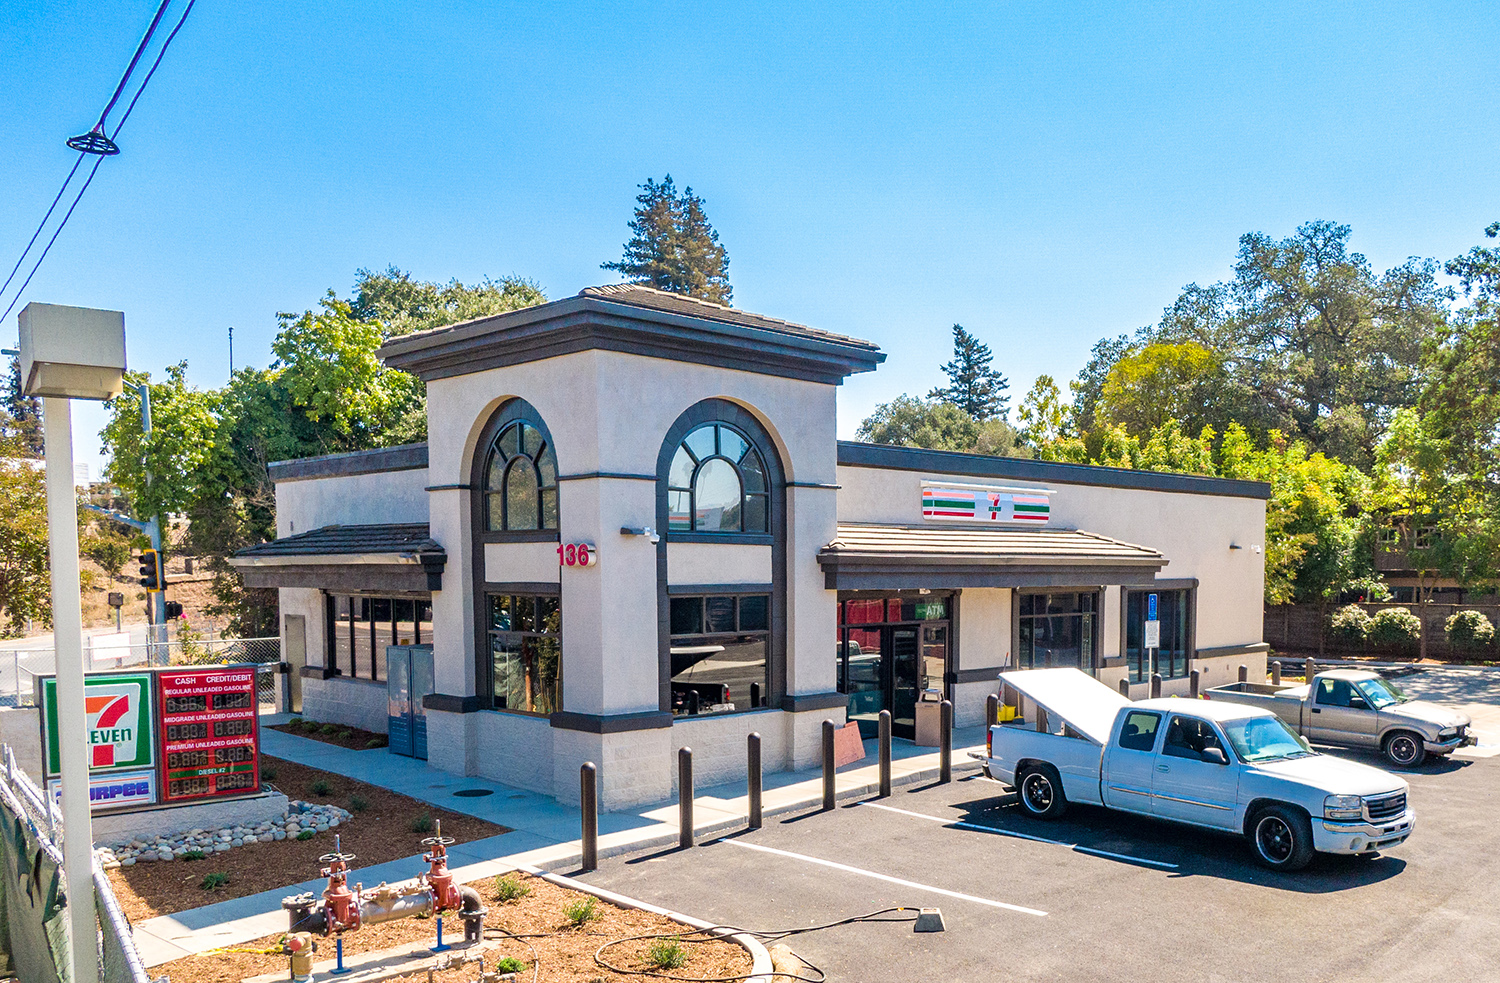 Hanley Investment Group Arranges Pre-Sale of Brand-New Single-Tenant 7-Eleven and Gas Station in Santa Rosa, Calif. for Record High Sales Price of $8 Million